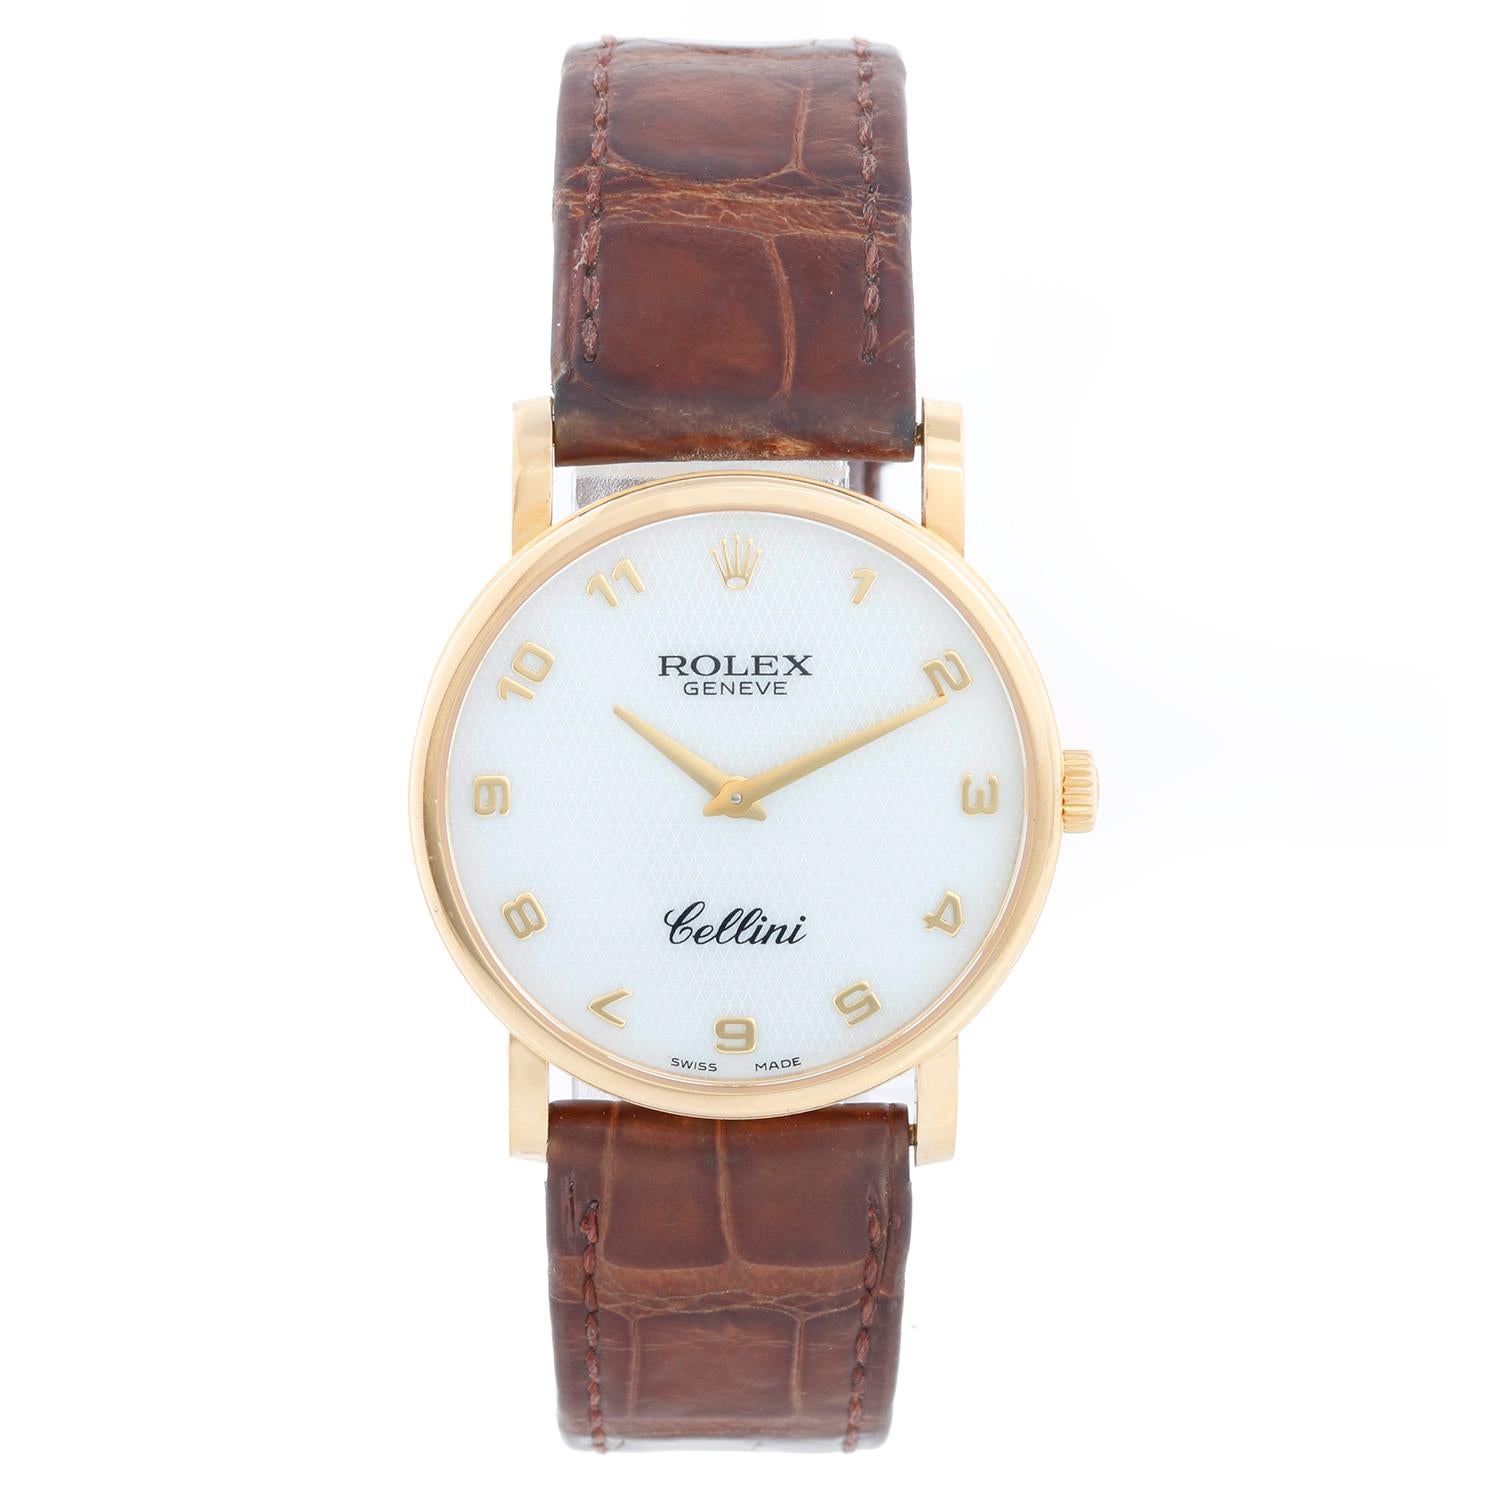 Rolex Cellini Classic 18k Yellow Gold Men's Watch 5115 - Manual winding. 18k yellow gold case (32 mm). Mother of Pearl  jubilee dial with Arabic numerals. Brown strap band with 18k yellow gold Rolex buckle. Pre-owned with custom box and card. Dated